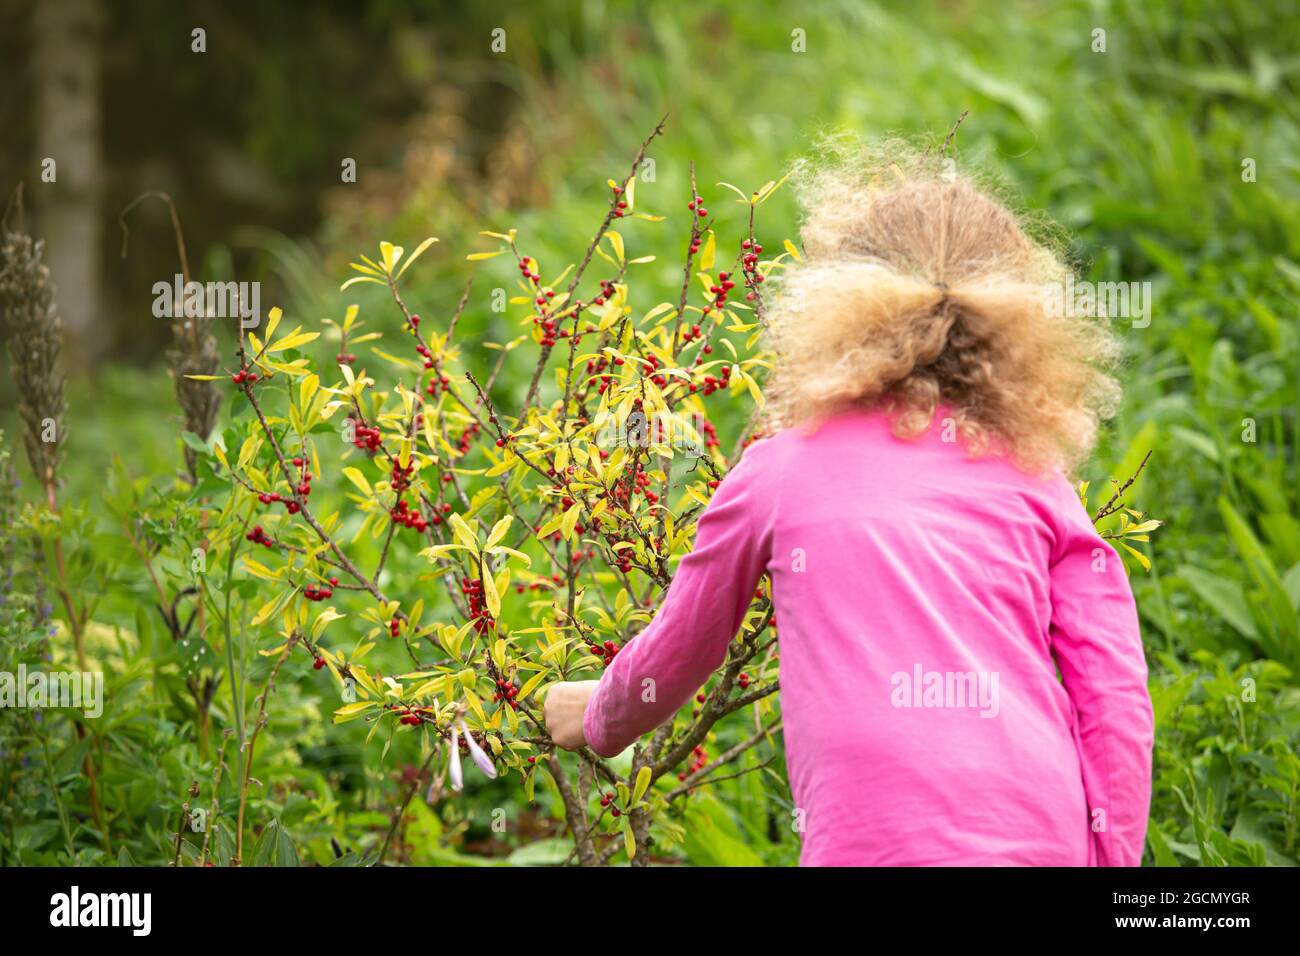 Young 4 year old curious child pick and eat highly poisonous Daphne mezereum red berry from bush. Health hazard and poisoning concept. Stock Photo